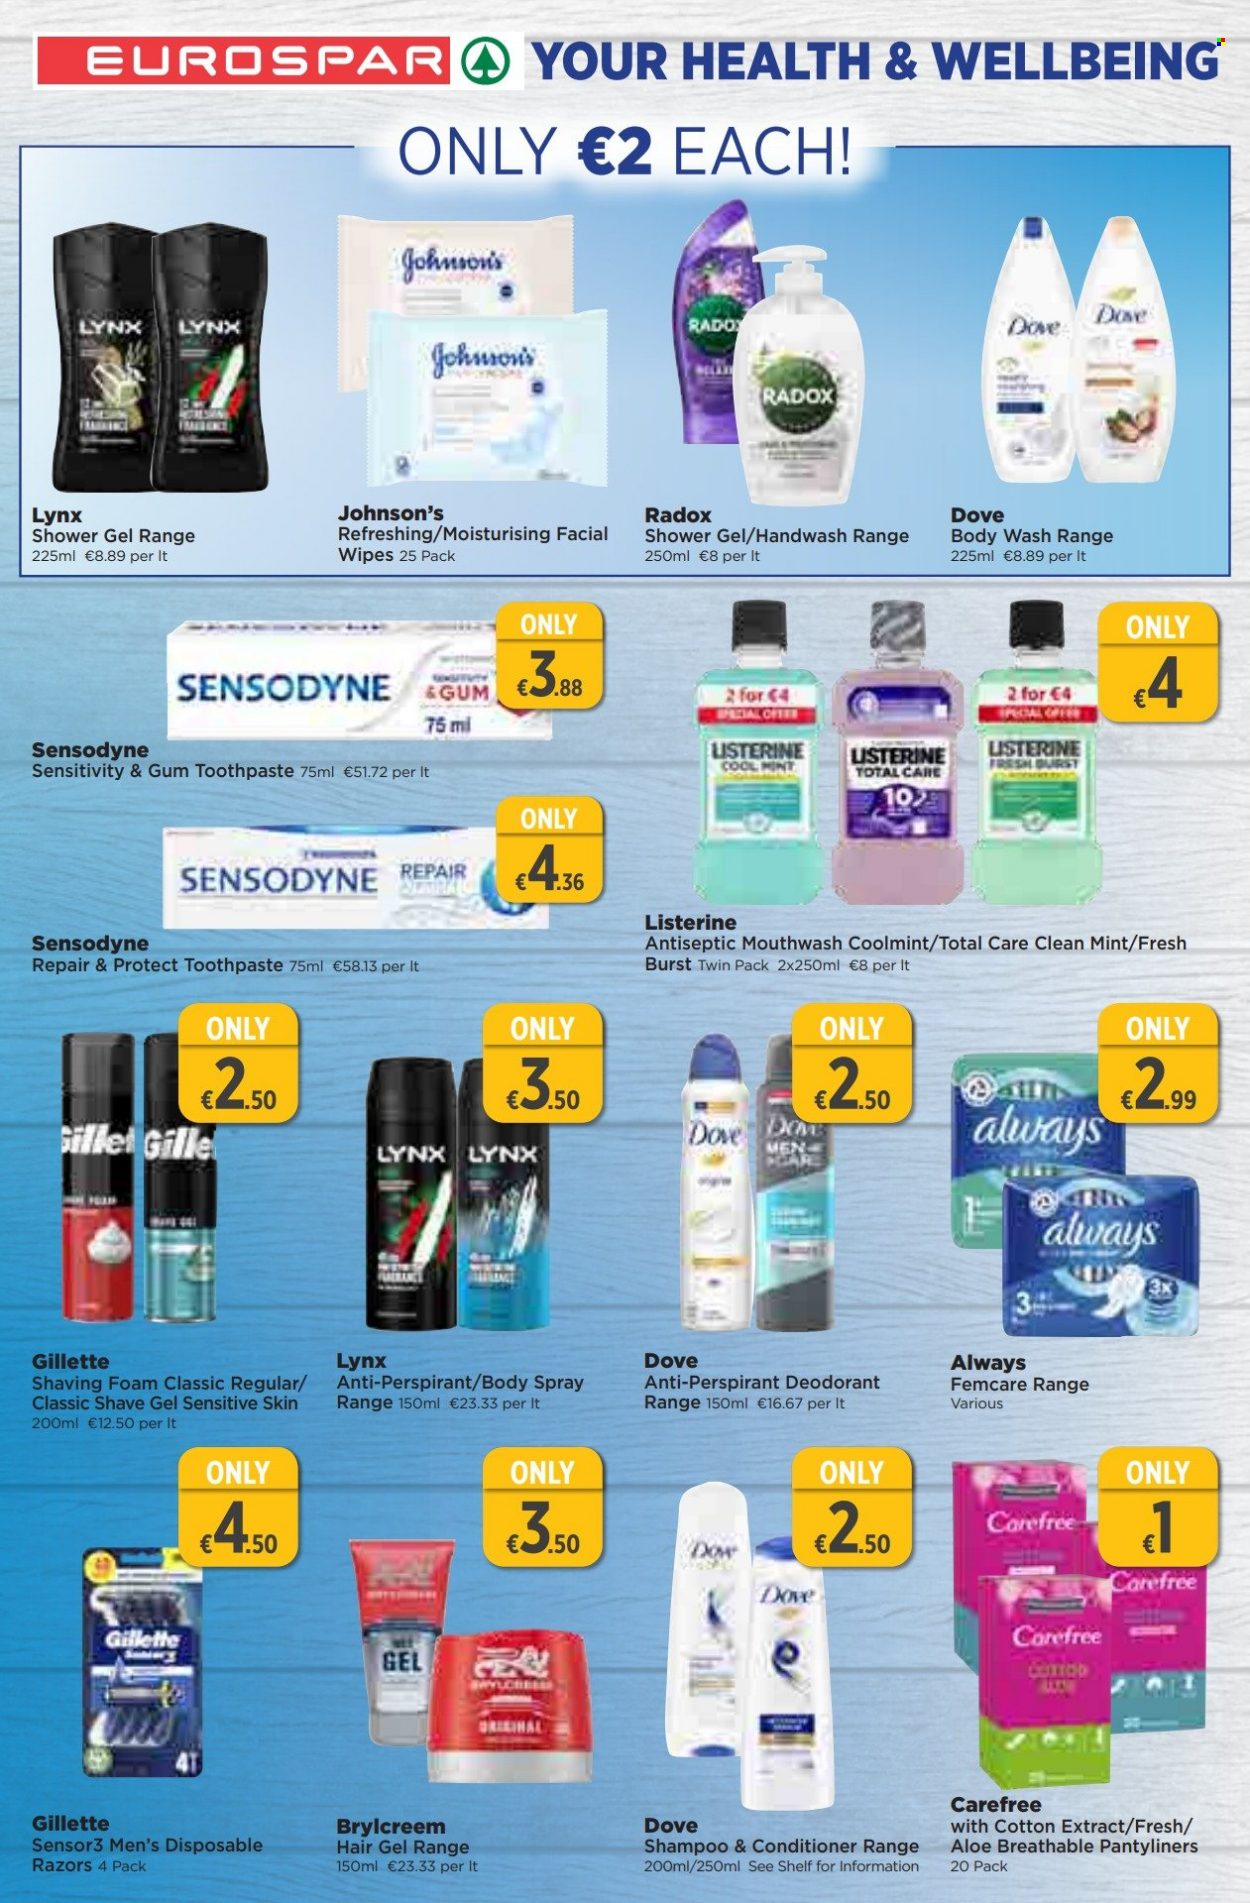 thumbnail - EUROSPAR offer  - 23.03.2023 - 12.04.2023 - Sales products - Ace, Dove, wipes, Johnson's, WAVE, body wash, shampoo, shower gel, hand wash, Radox, Listerine, toothpaste, Sensodyne, mouthwash, Carefree, pantyliners, conditioner, body spray, anti-perspirant, deodorant, Gillette, shave gel, shaving foam, disposable razor. Page 12.